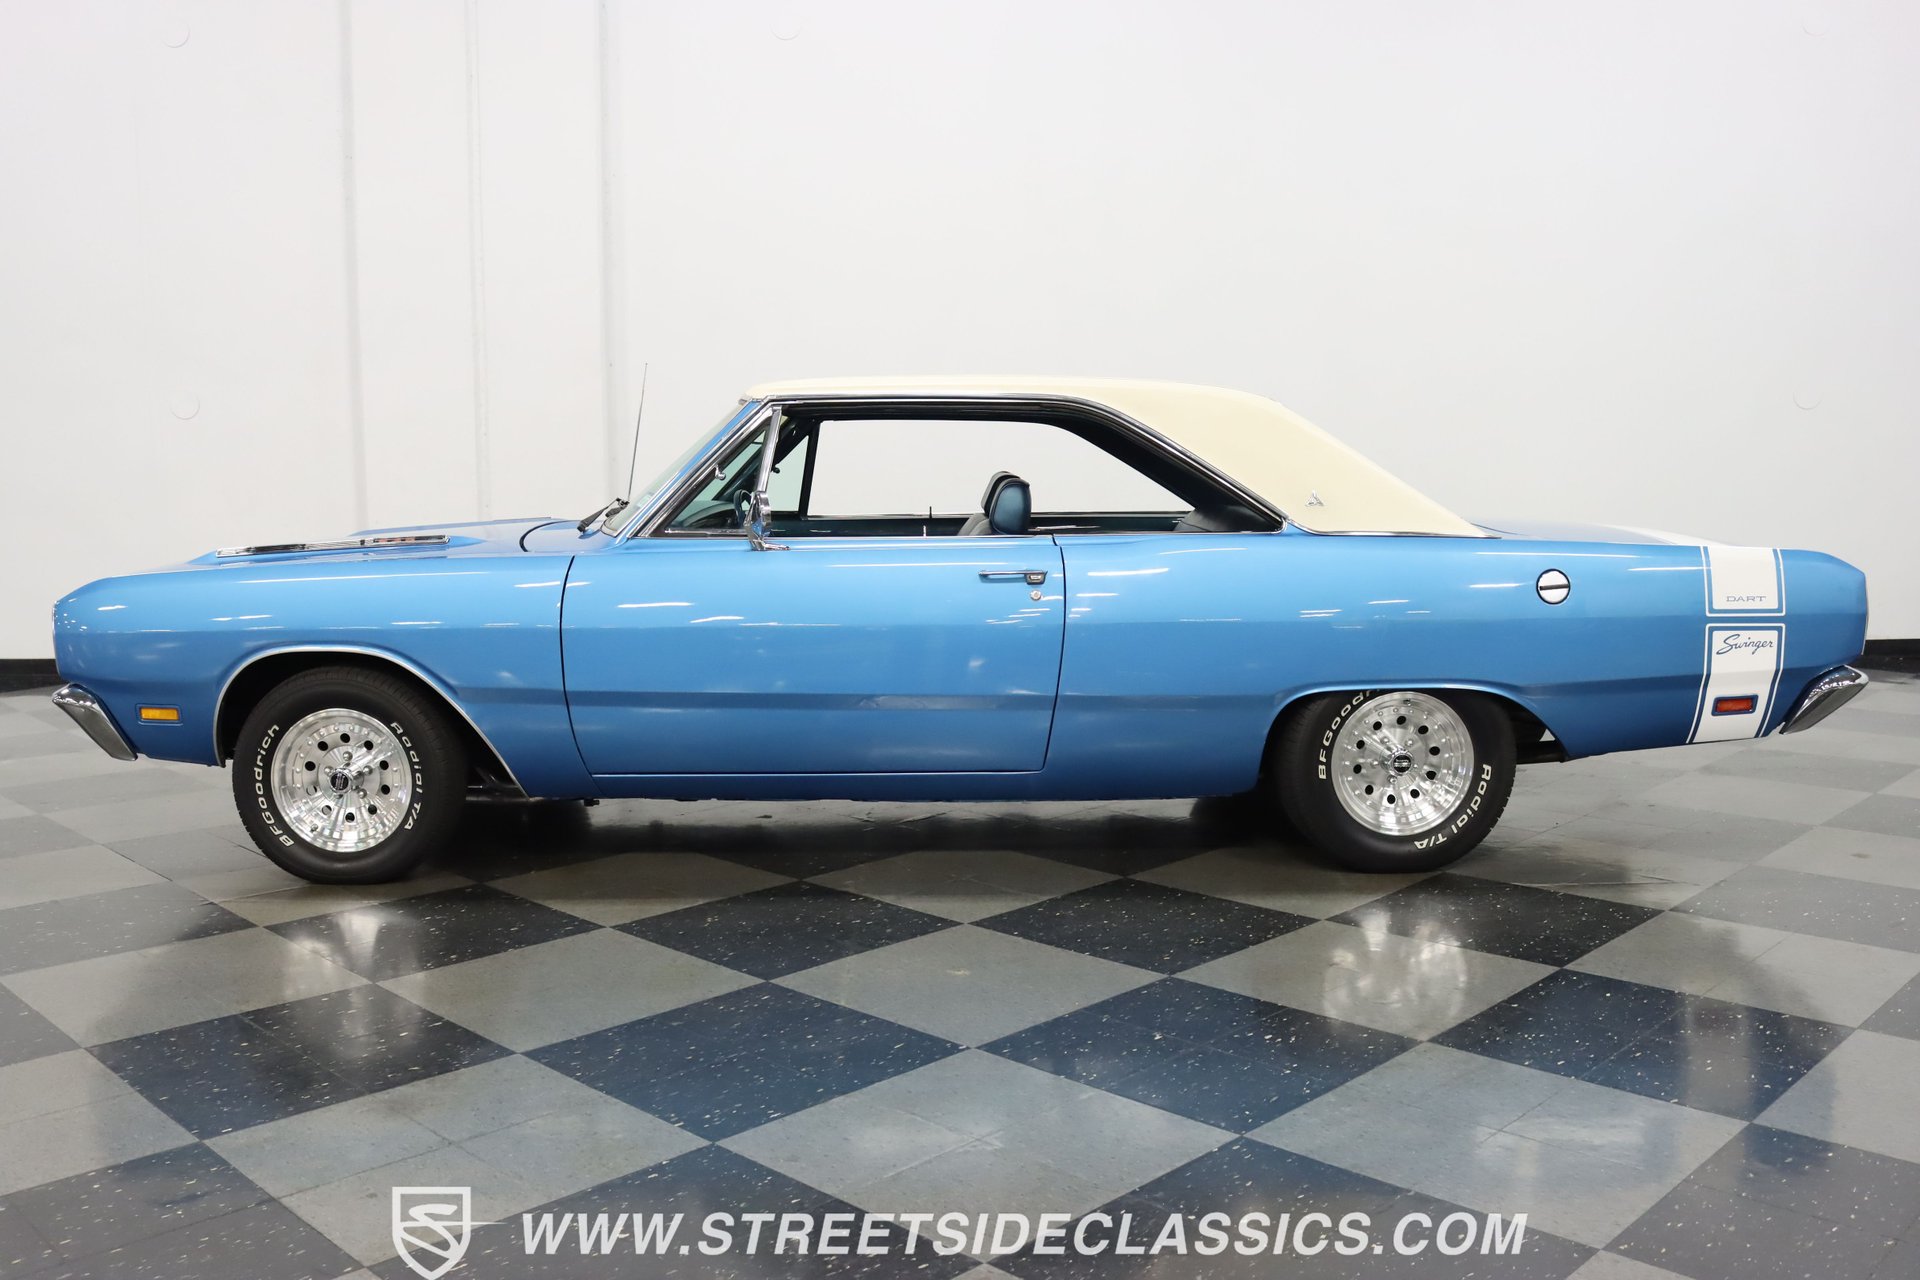 1969 Dodge Dart Classic Cars for Sale pic